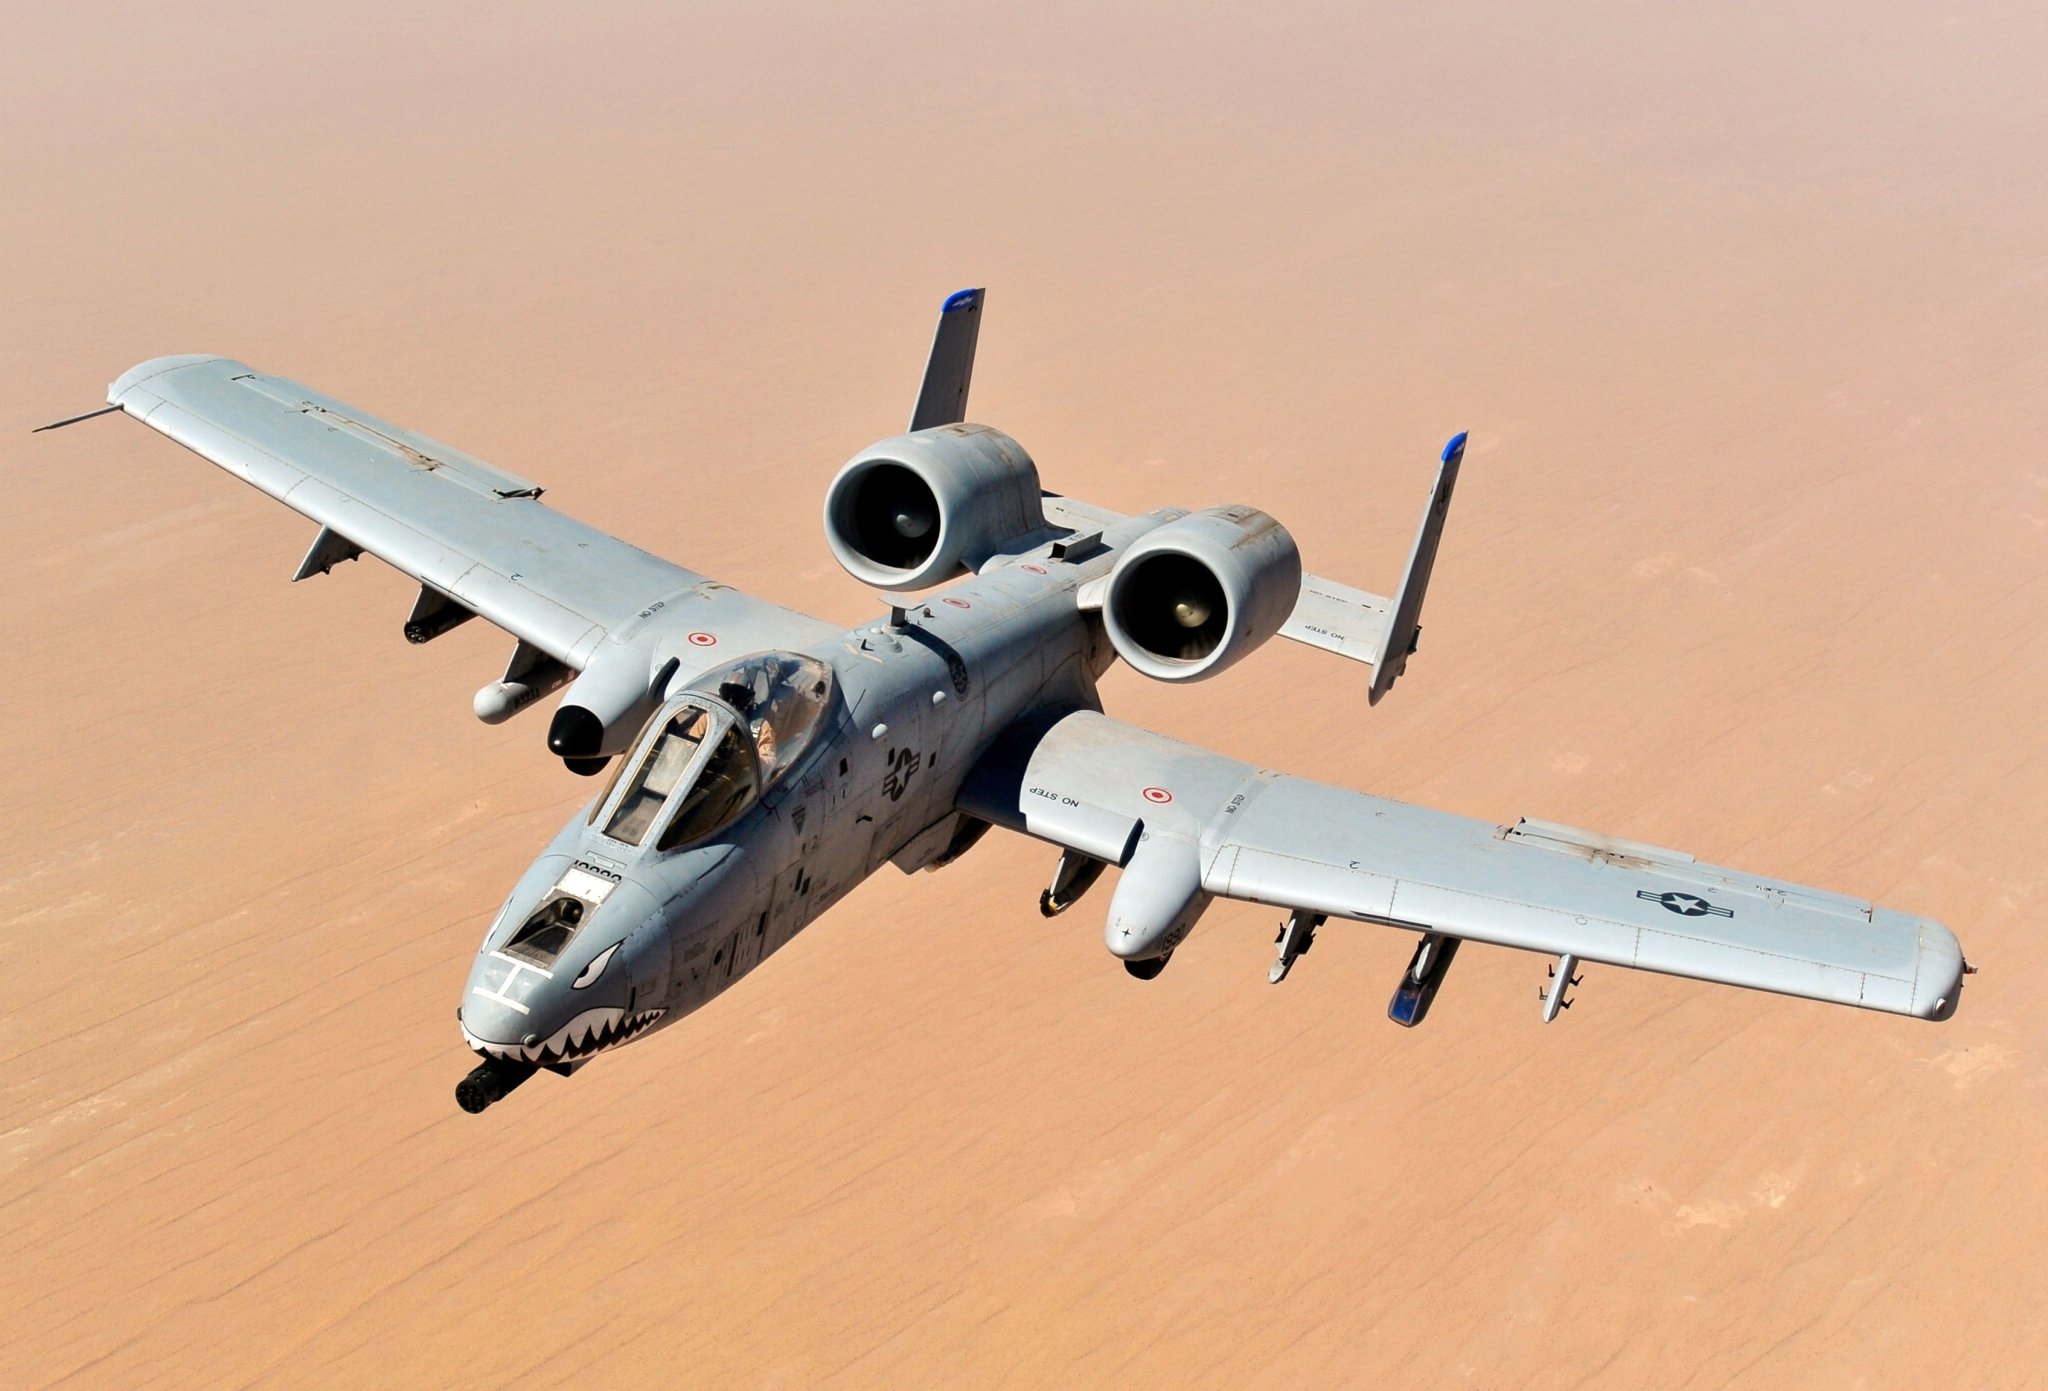 This Is Why The A-10 Warthog Is One Of The Scariest Military Planes